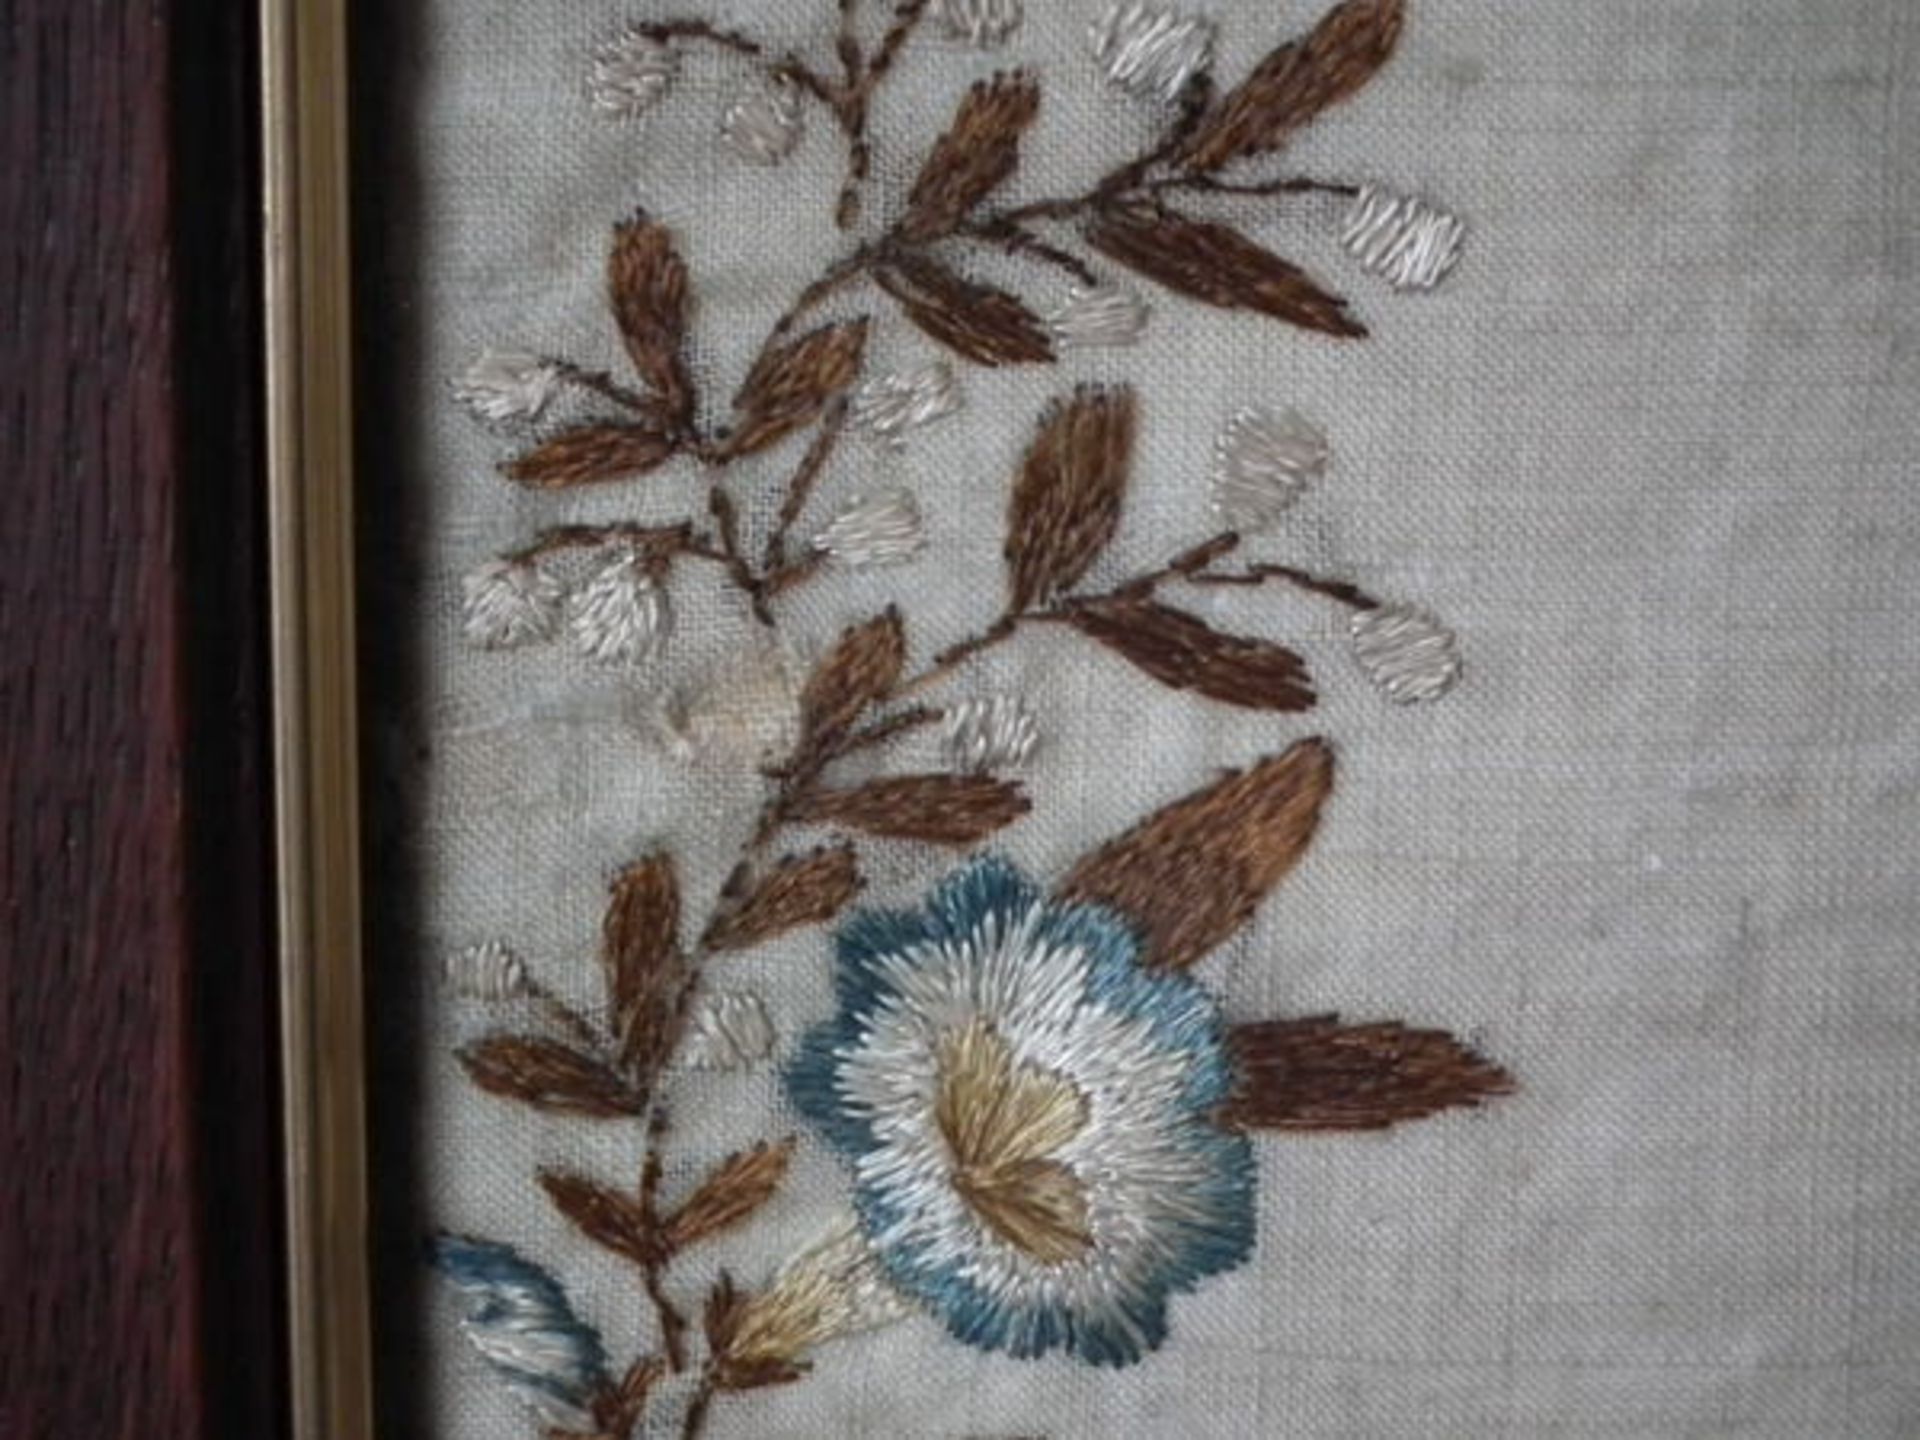 Irish Needlework Sampler dated 1832 by Mary Anne Enright FREE UK DELIVERY - Image 18 of 38